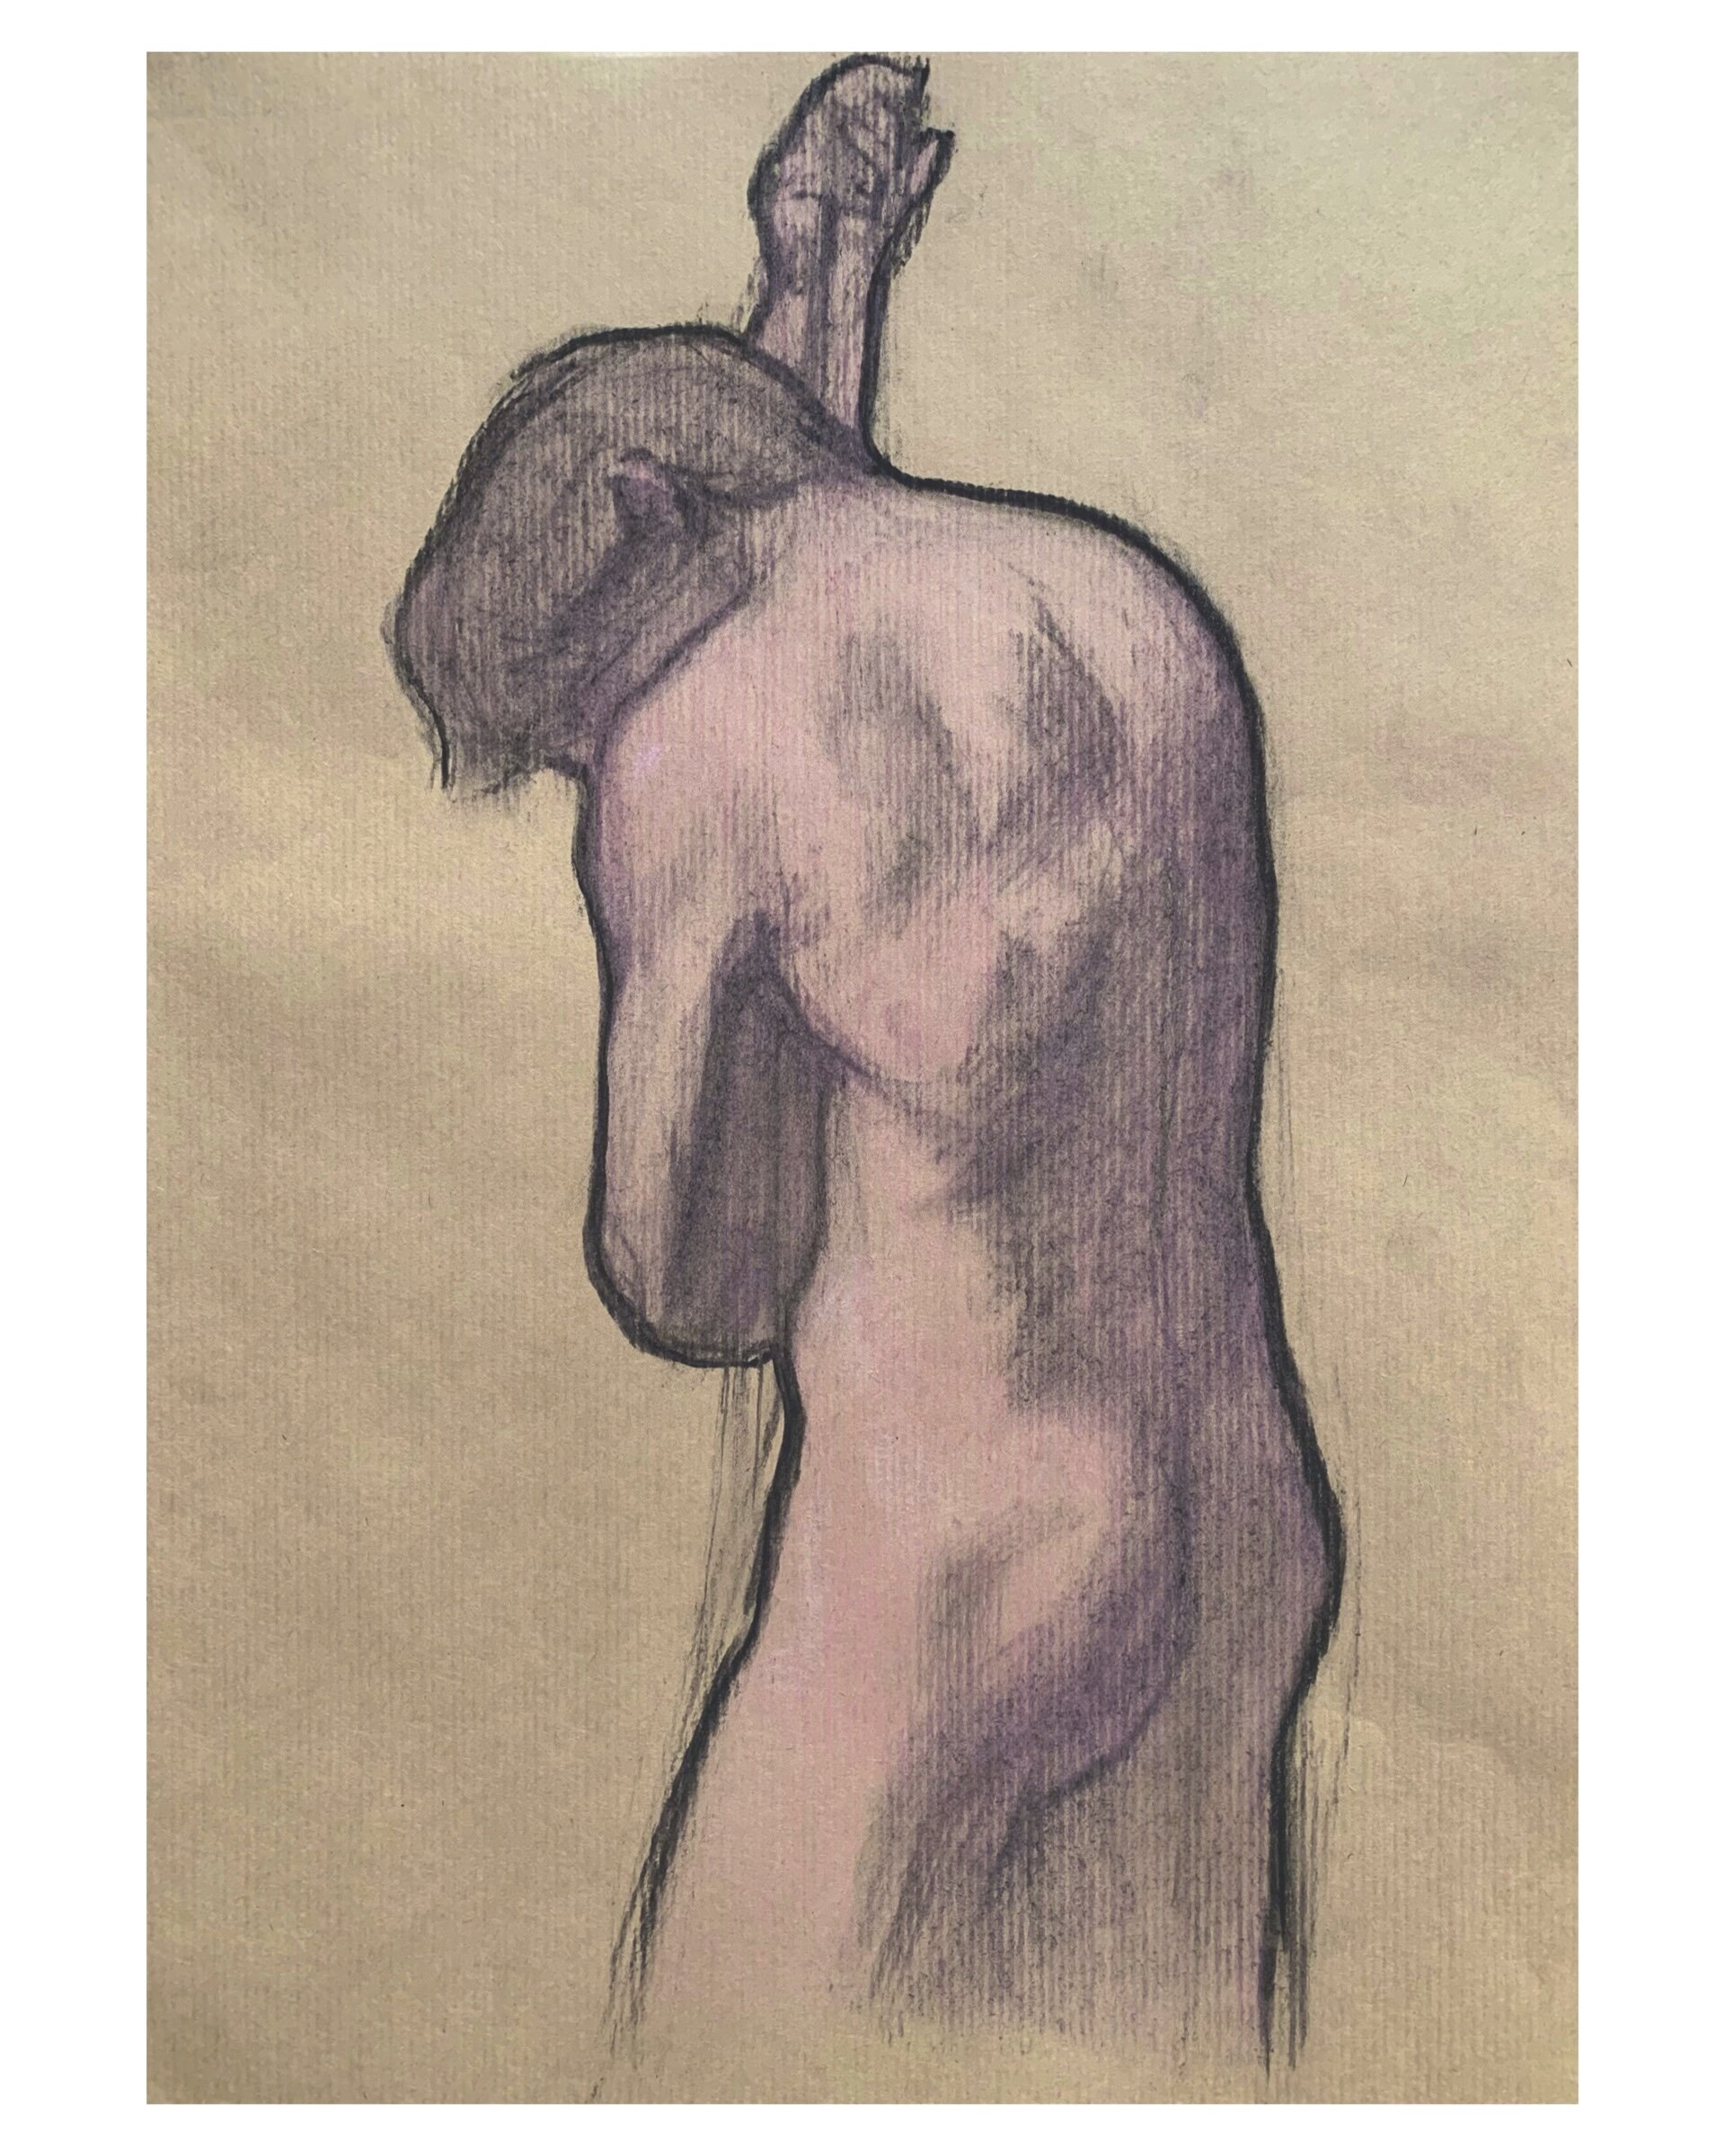   Victor 10 , charcoal and colored pencil on kraft paper, 42x28cm 